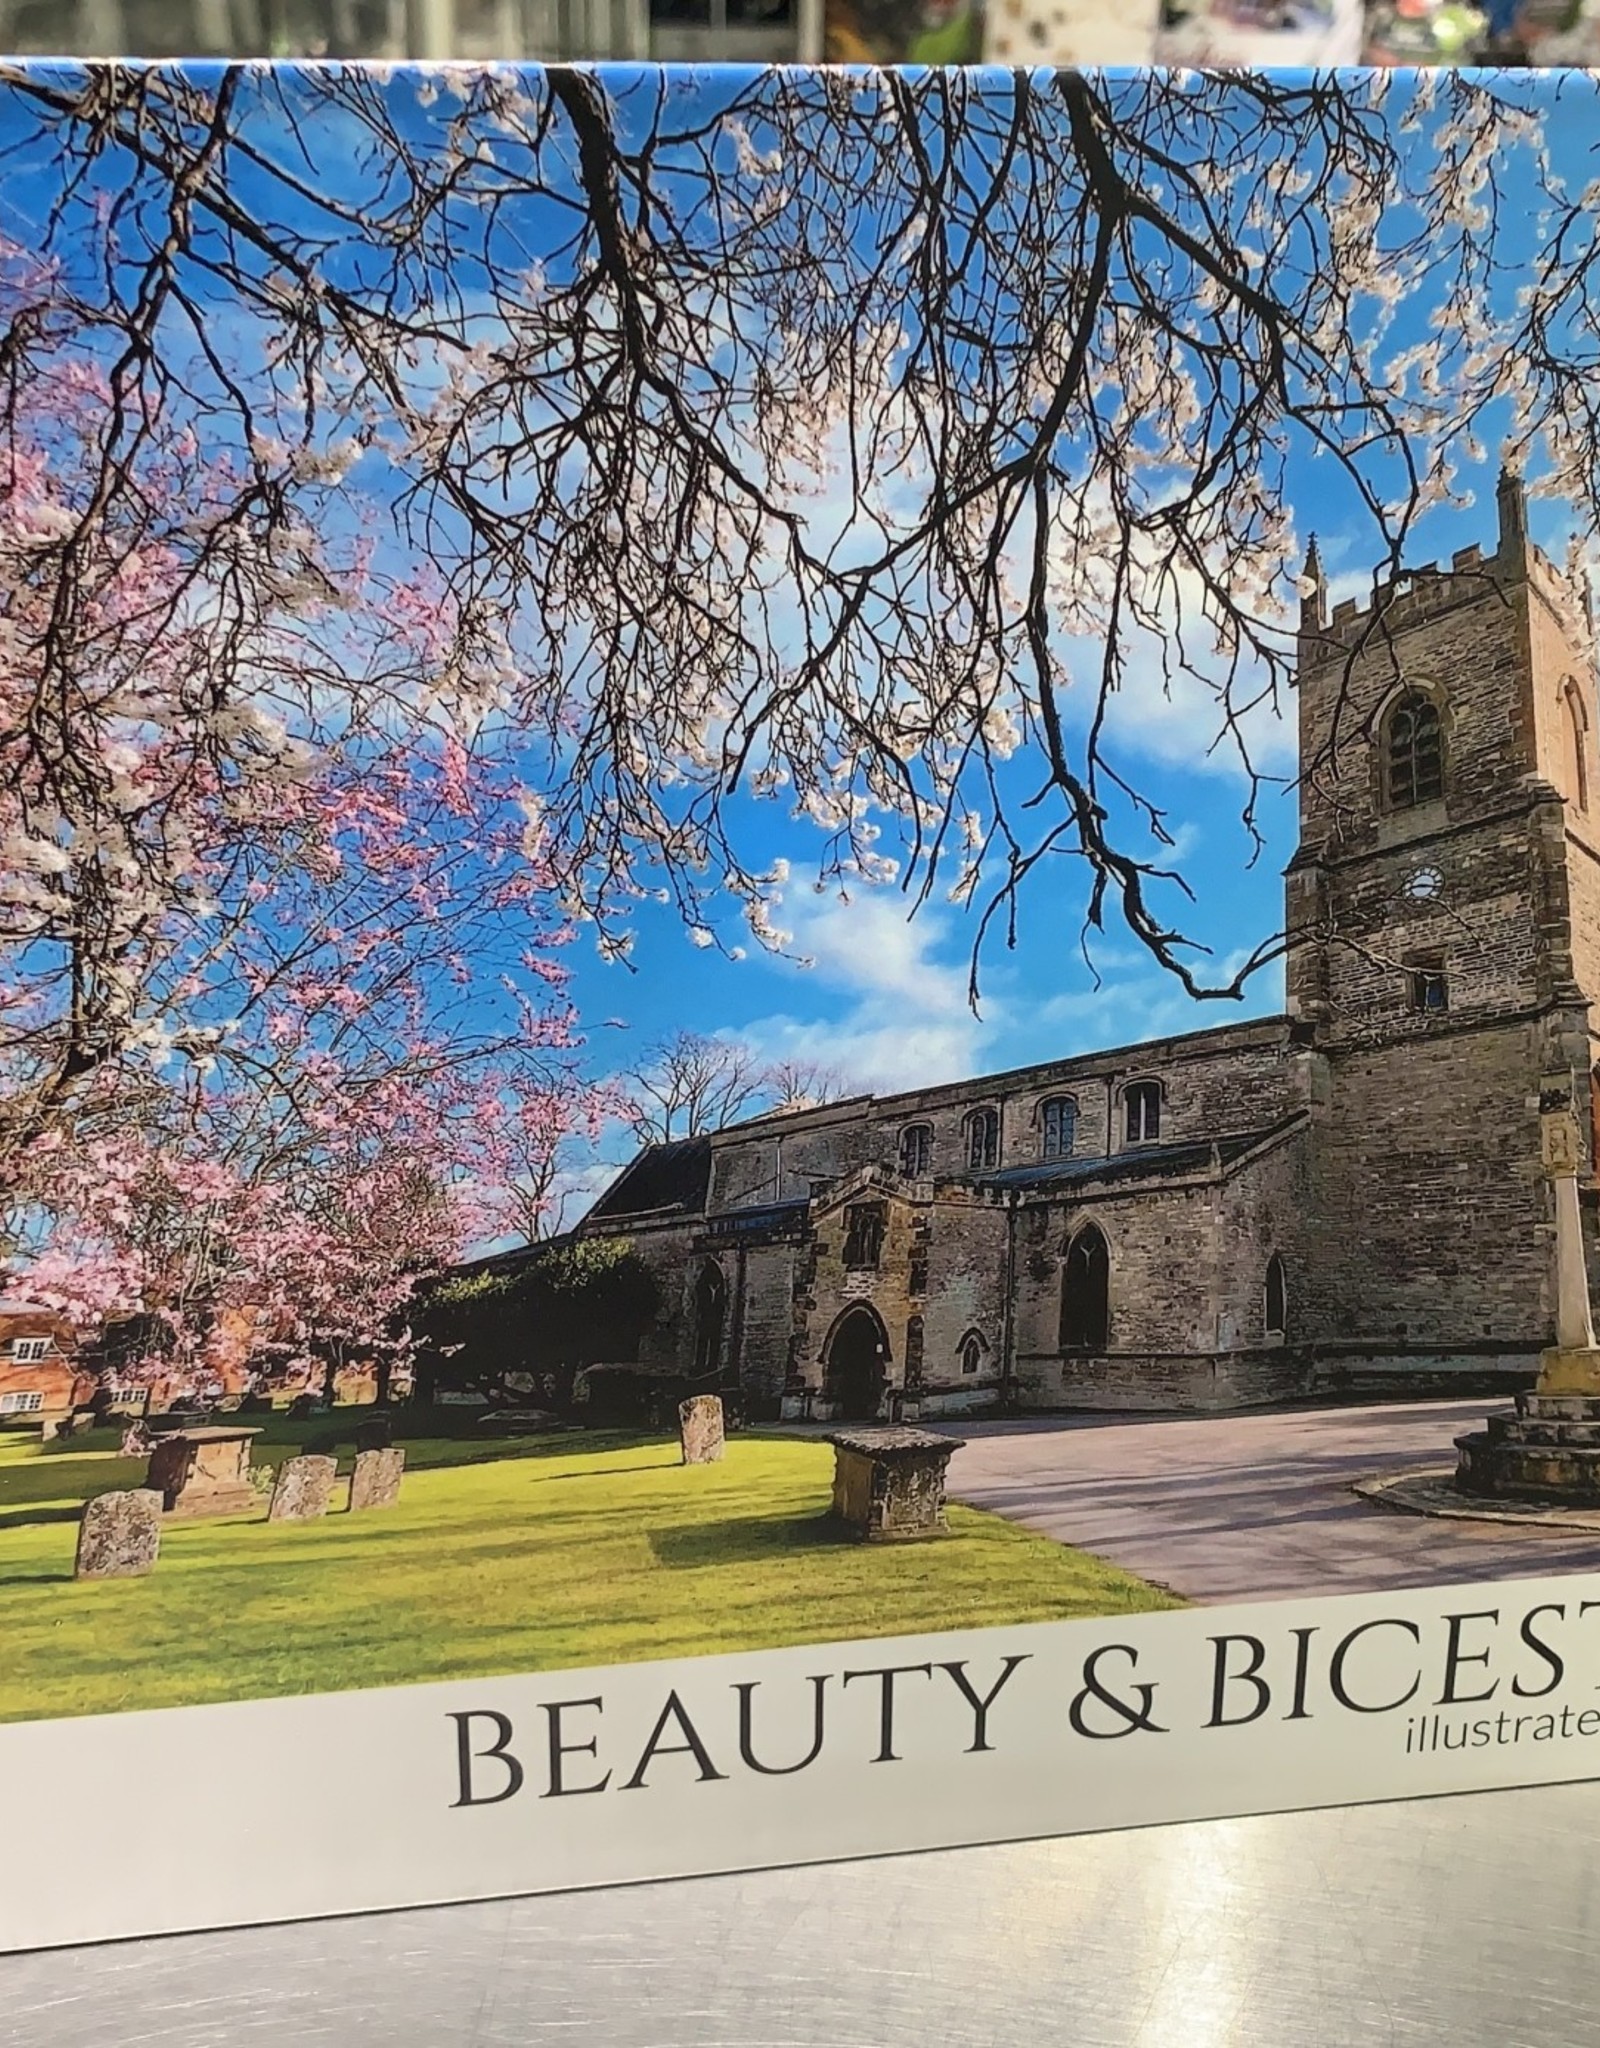 imagex Beauty & Bicester Book 3